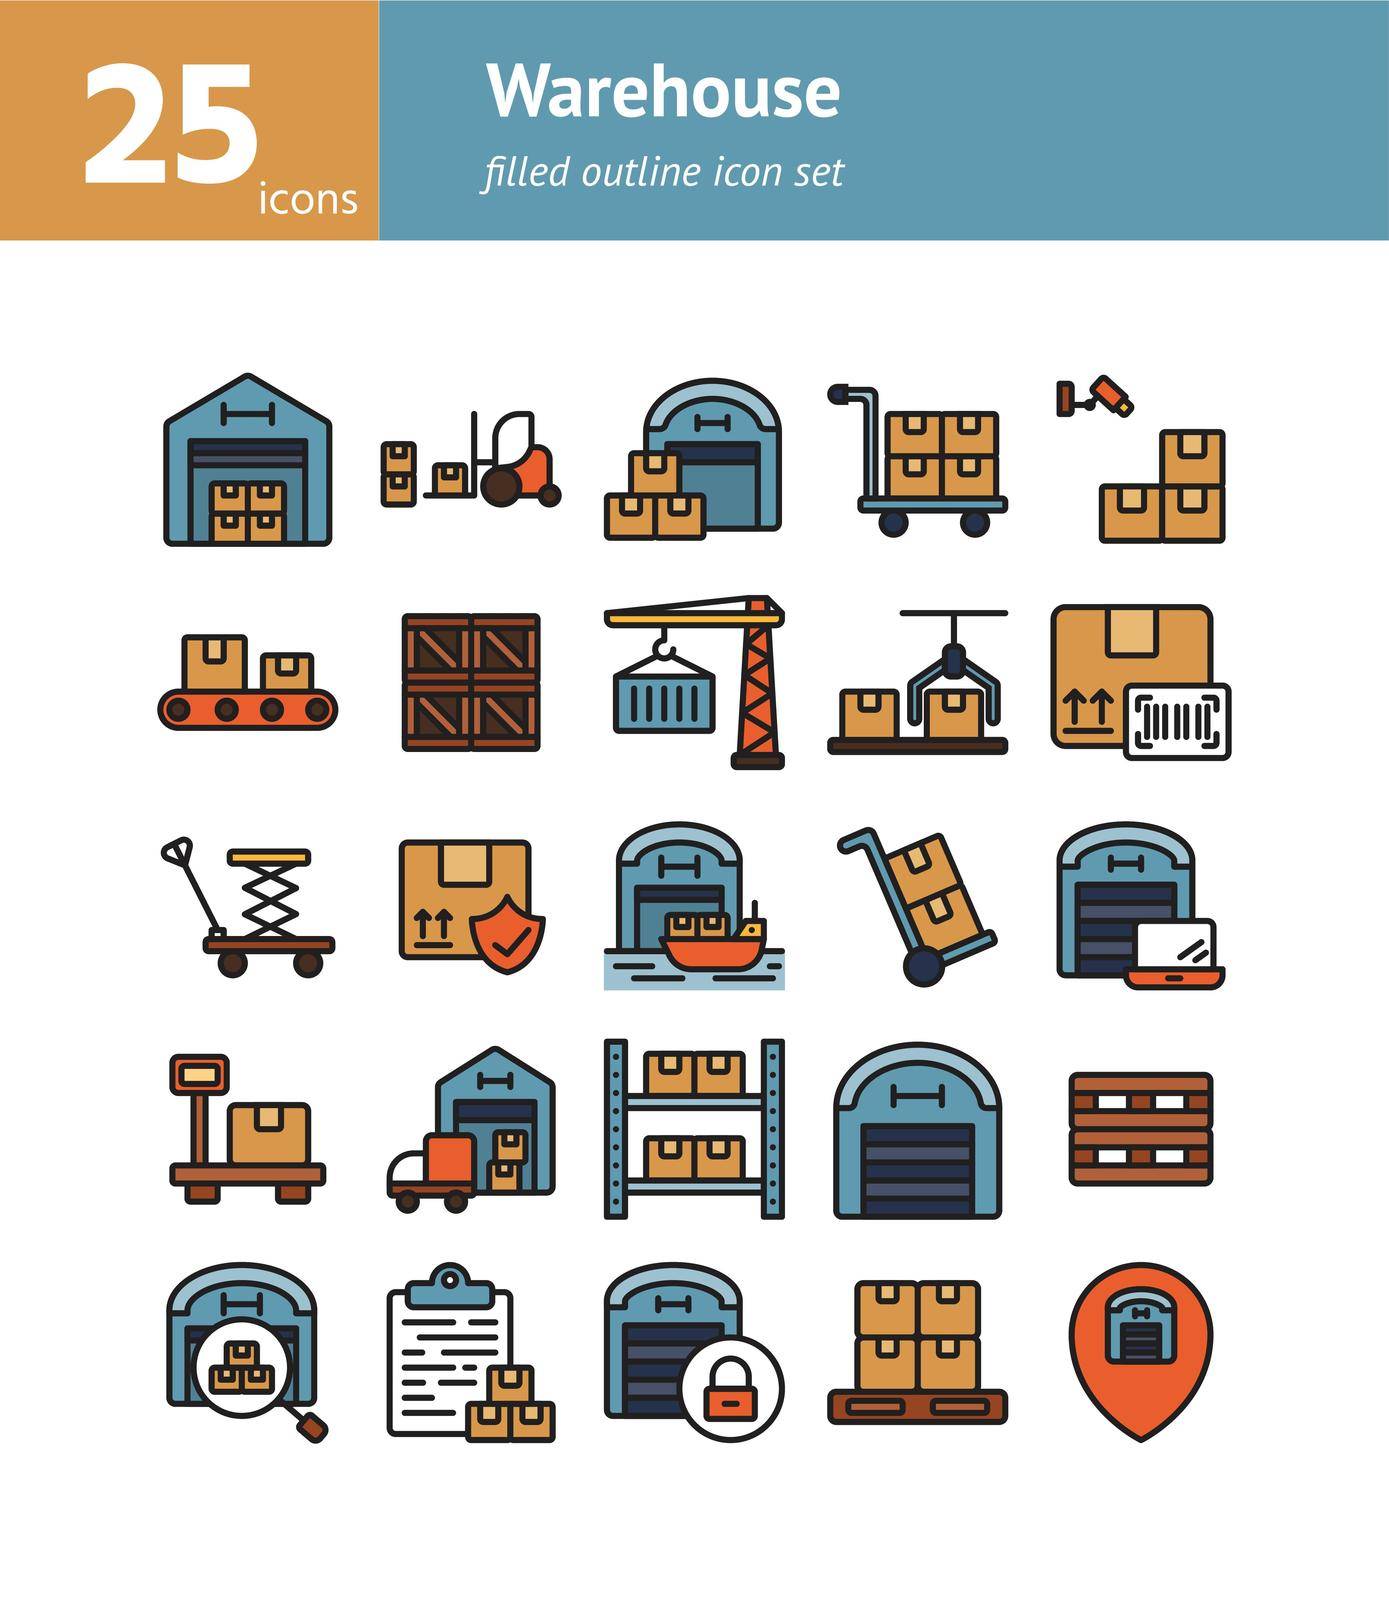 Warehouse filled outline icon set. by doraclub